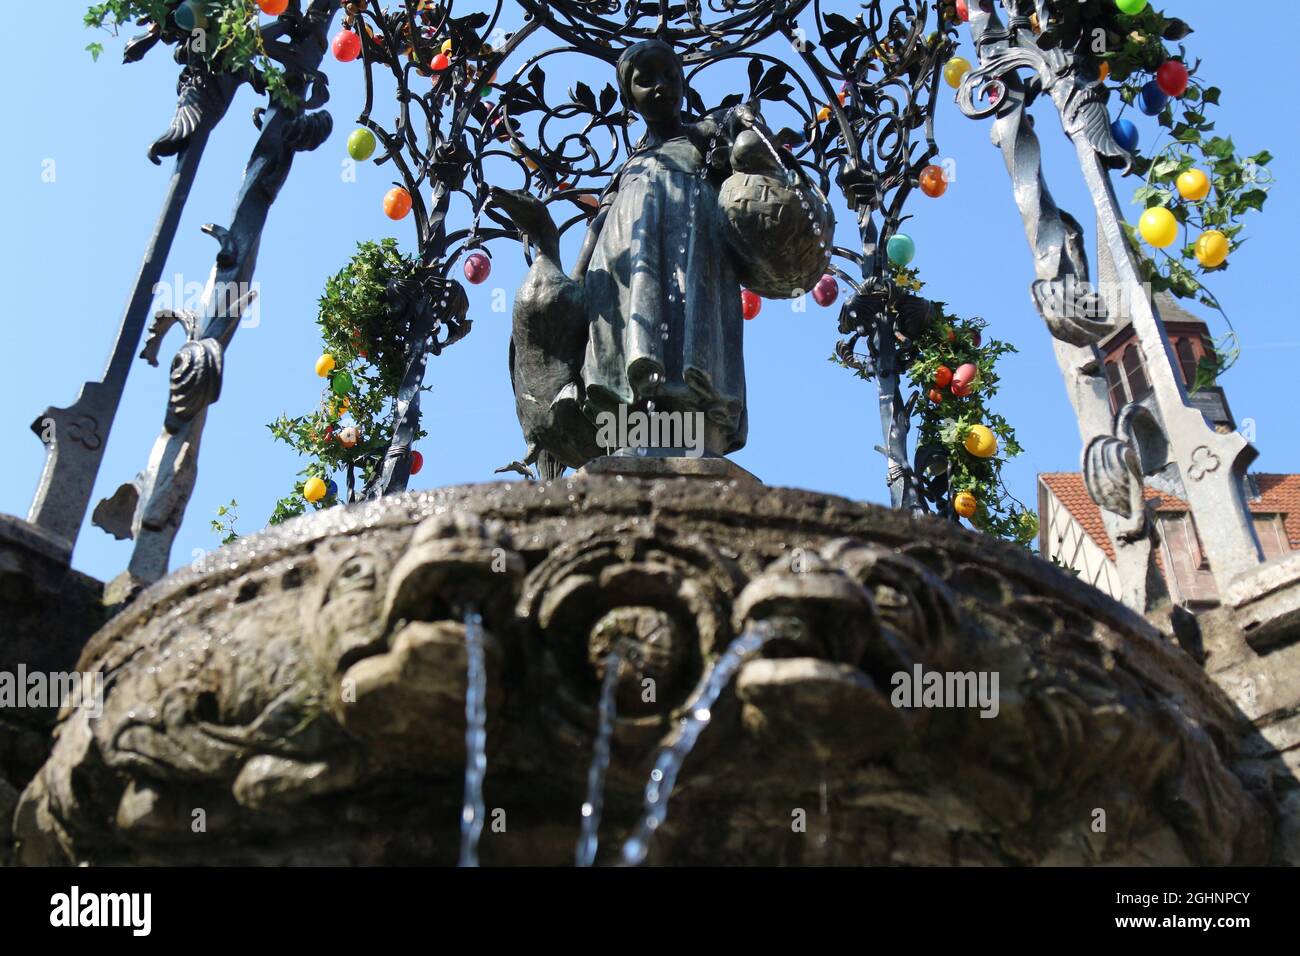 GOETTINGEN, GERMANY - Mar 20, 2015: A low angle shot of the Gaenseliesel or Goose Girl fountain at Goettingen square in Germany. Stock Photo